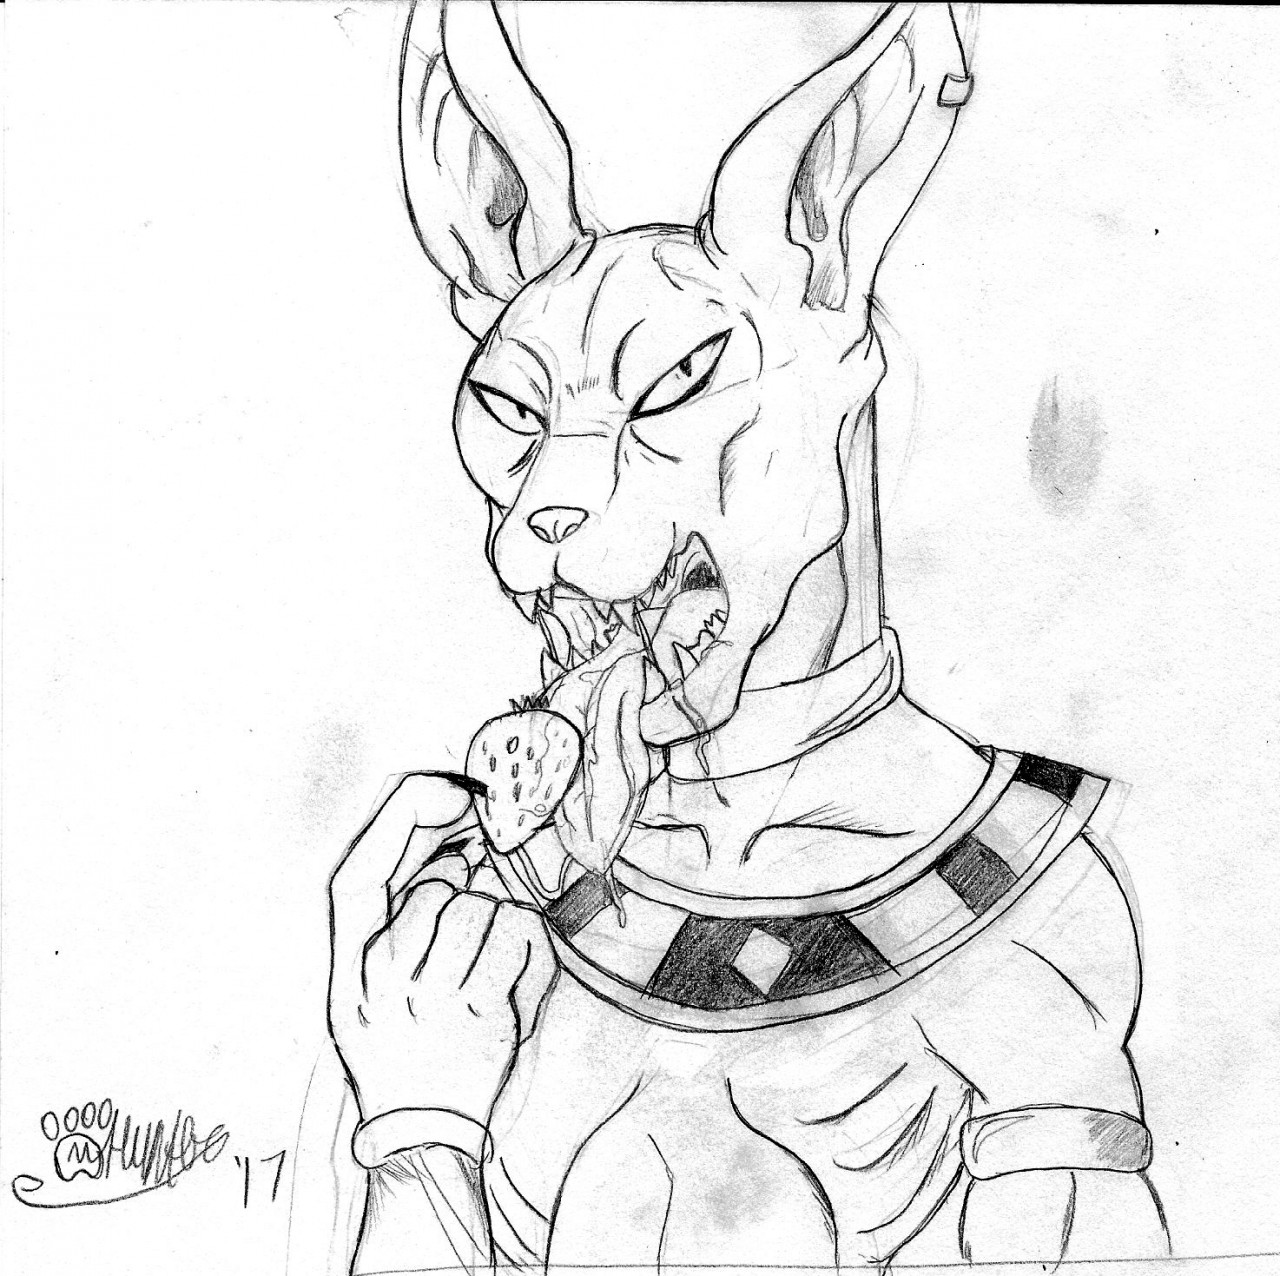 Share more than 170 beerus sketch